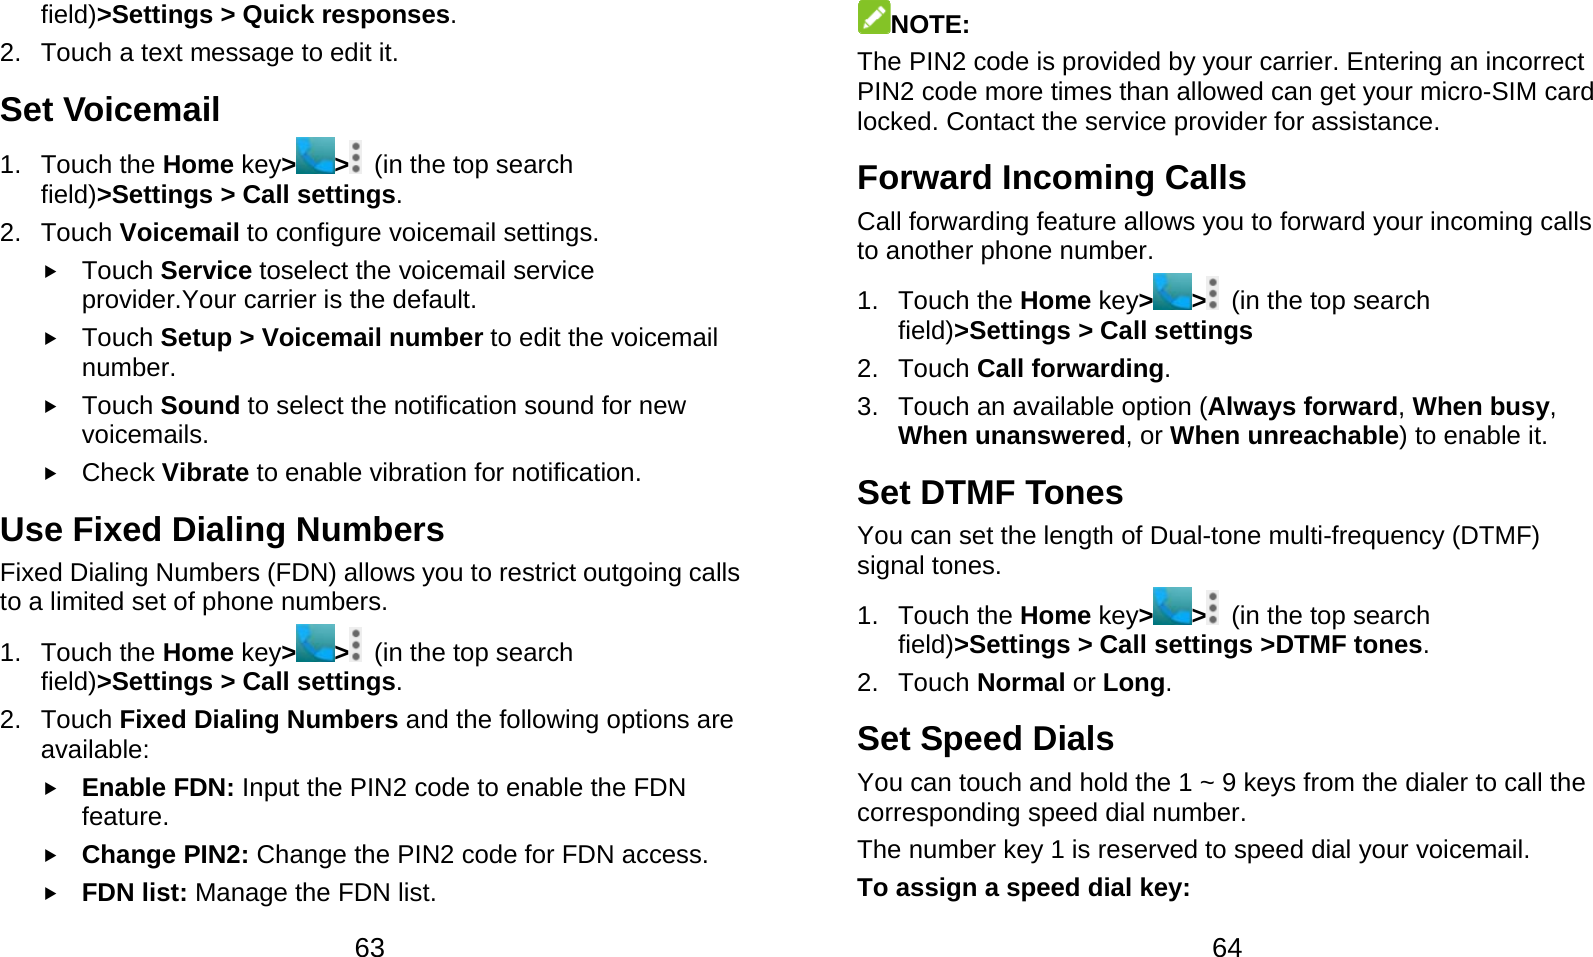  63 field)&gt;Settings &gt; Quick responses. 2.  Touch a text message to edit it. Set Voicemail 1. Touch the Home key&gt; &gt;   (in the top search field)&gt;Settings &gt; Call settings. 2. Touch Voicemail to configure voicemail settings.  Touch Service toselect the voicemail service provider.Your carrier is the default.      Touch Setup &gt; Voicemail number to edit the voicemail number.  Touch Sound to select the notification sound for new voicemails.  Check Vibrate to enable vibration for notification. Use Fixed Dialing Numbers Fixed Dialing Numbers (FDN) allows you to restrict outgoing calls to a limited set of phone numbers. 1. Touch the Home key&gt;&gt;  (in the top search field)&gt;Settings &gt; Call settings. 2. Touch Fixed Dialing Numbers and the following options are available:  Enable FDN: Input the PIN2 code to enable the FDN feature.  Change PIN2: Change the PIN2 code for FDN access.  FDN list: Manage the FDN list.  64 NOTE: The PIN2 code is provided by your carrier. Entering an incorrect PIN2 code more times than allowed can get your micro-SIM card locked. Contact the service provider for assistance. Forward Incoming Calls Call forwarding feature allows you to forward your incoming calls to another phone number. 1. Touch the Home key&gt;&gt;  (in the top search field)&gt;Settings &gt; Call settings 2. Touch Call forwarding. 3.  Touch an available option (Always forward, When busy, When unanswered, or When unreachable) to enable it. Set DTMF Tones You can set the length of Dual-tone multi-frequency (DTMF) signal tones. 1. Touch the Home key&gt;&gt;  (in the top search field)&gt;Settings &gt; Call settings &gt;DTMF tones. 2. Touch Normal or Long. Set Speed Dials You can touch and hold the 1 ~ 9 keys from the dialer to call the corresponding speed dial number. The number key 1 is reserved to speed dial your voicemail. To assign a speed dial key: 